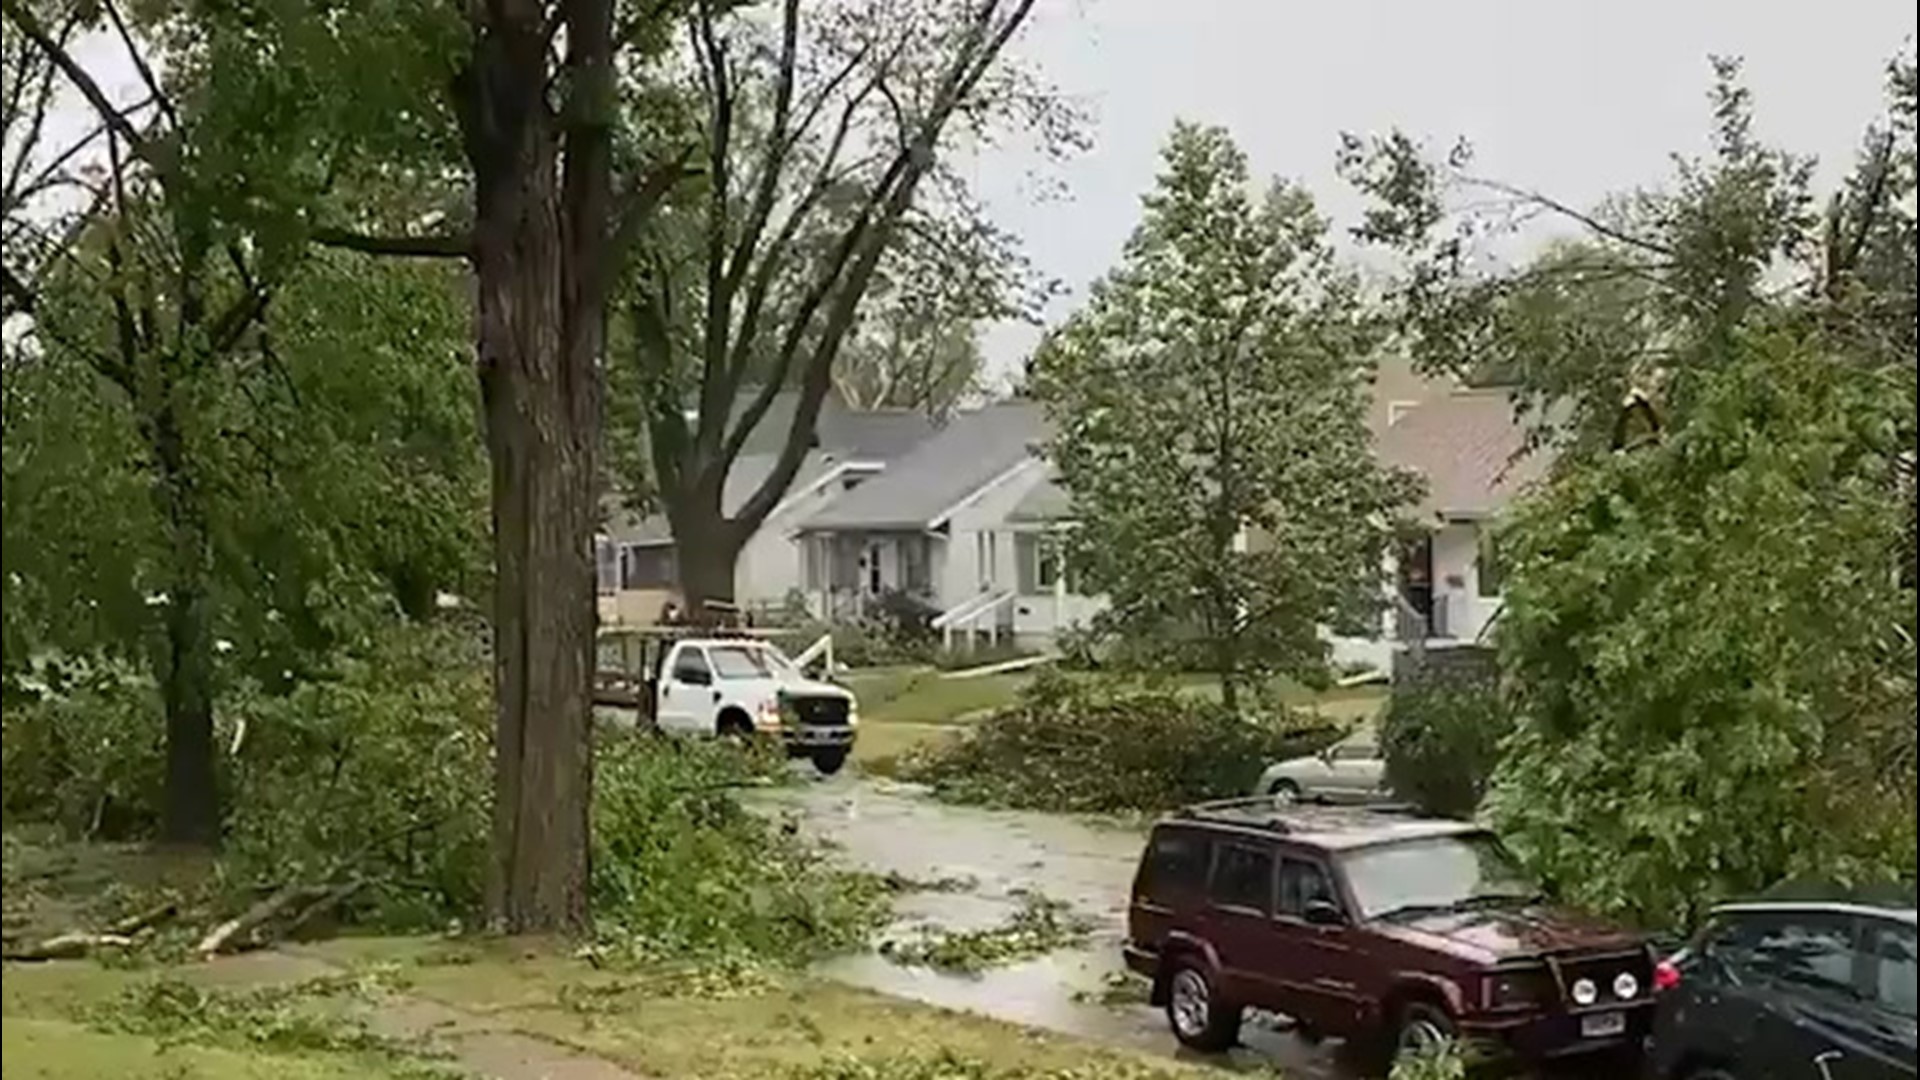 This neighborhood in Cedar Rapids, Iowa, is completely covered by downed trees and debris on Aug. 10, after a derecho swept through this area.